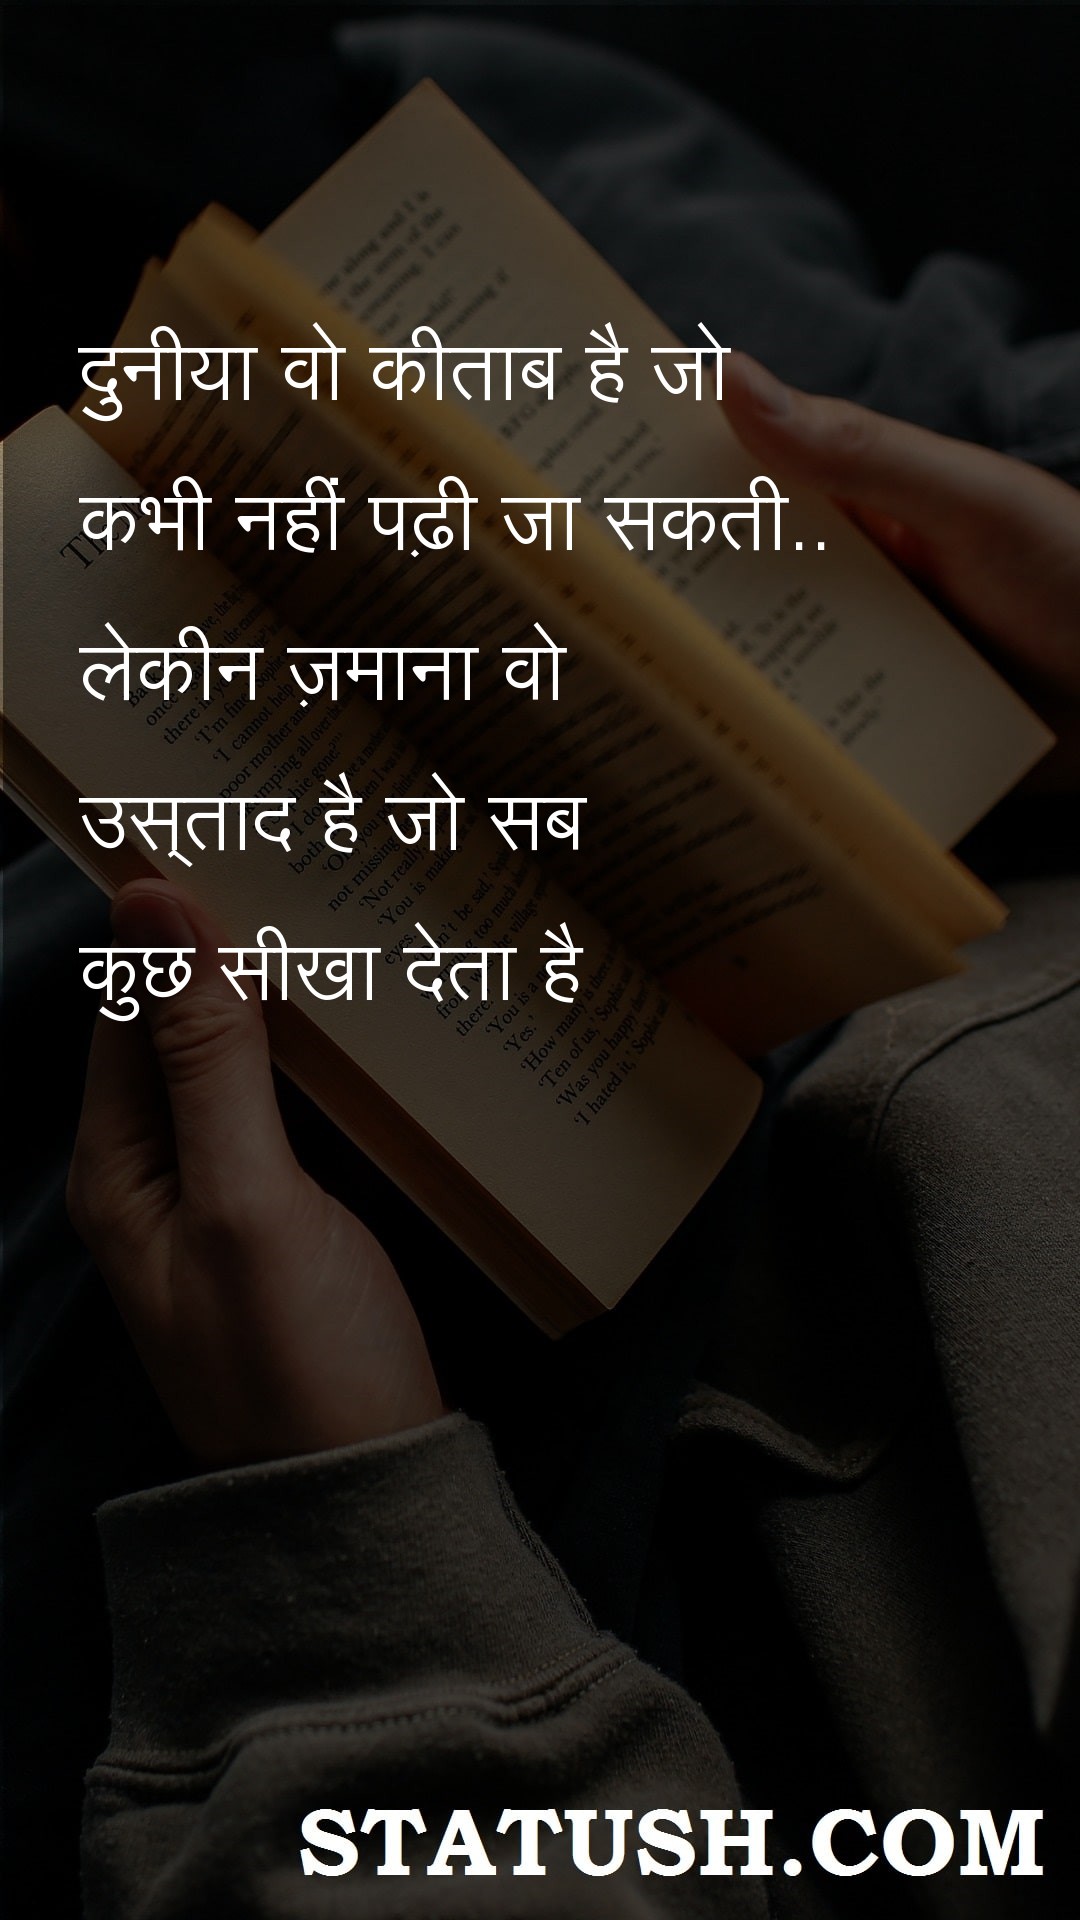 The world is a book that can never be read Hindi Quotes at statush.com